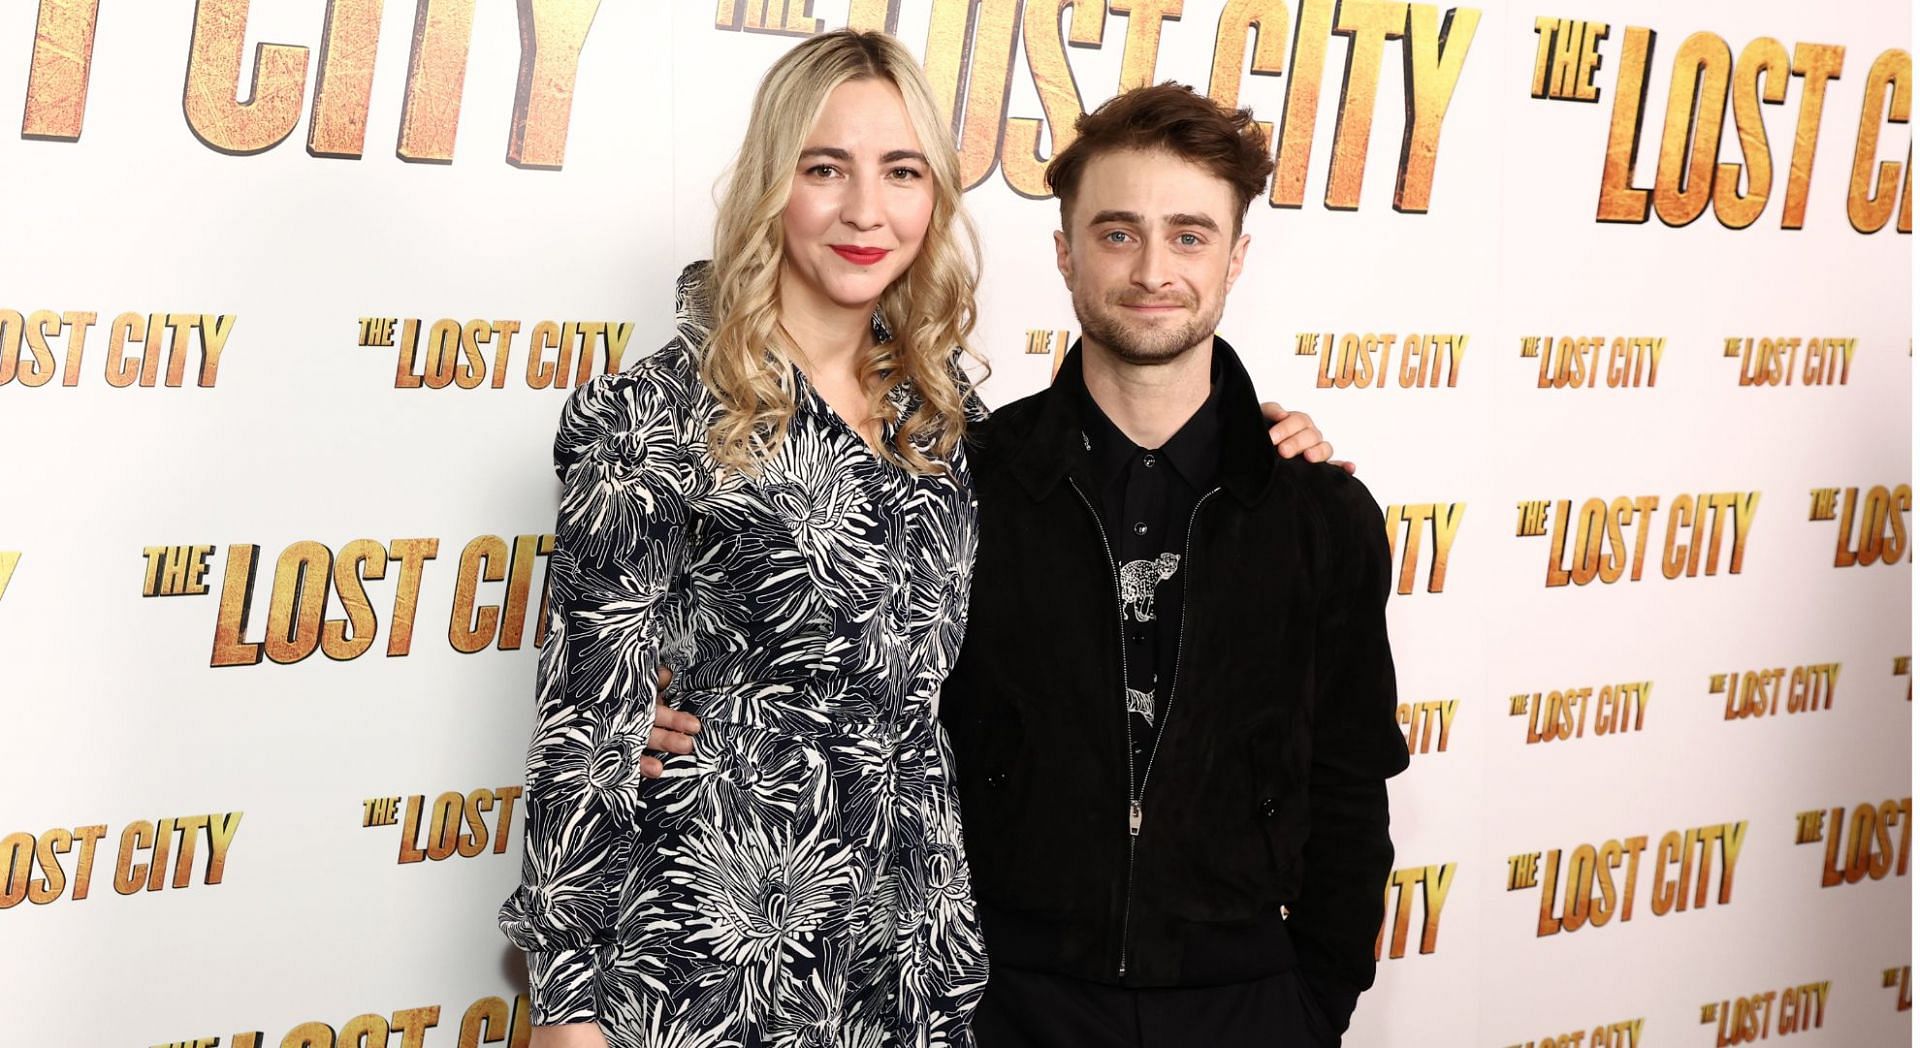 Daniel Radcliffe and Erin Darke have been dating for nearly a decade (Image via Shutterstock)